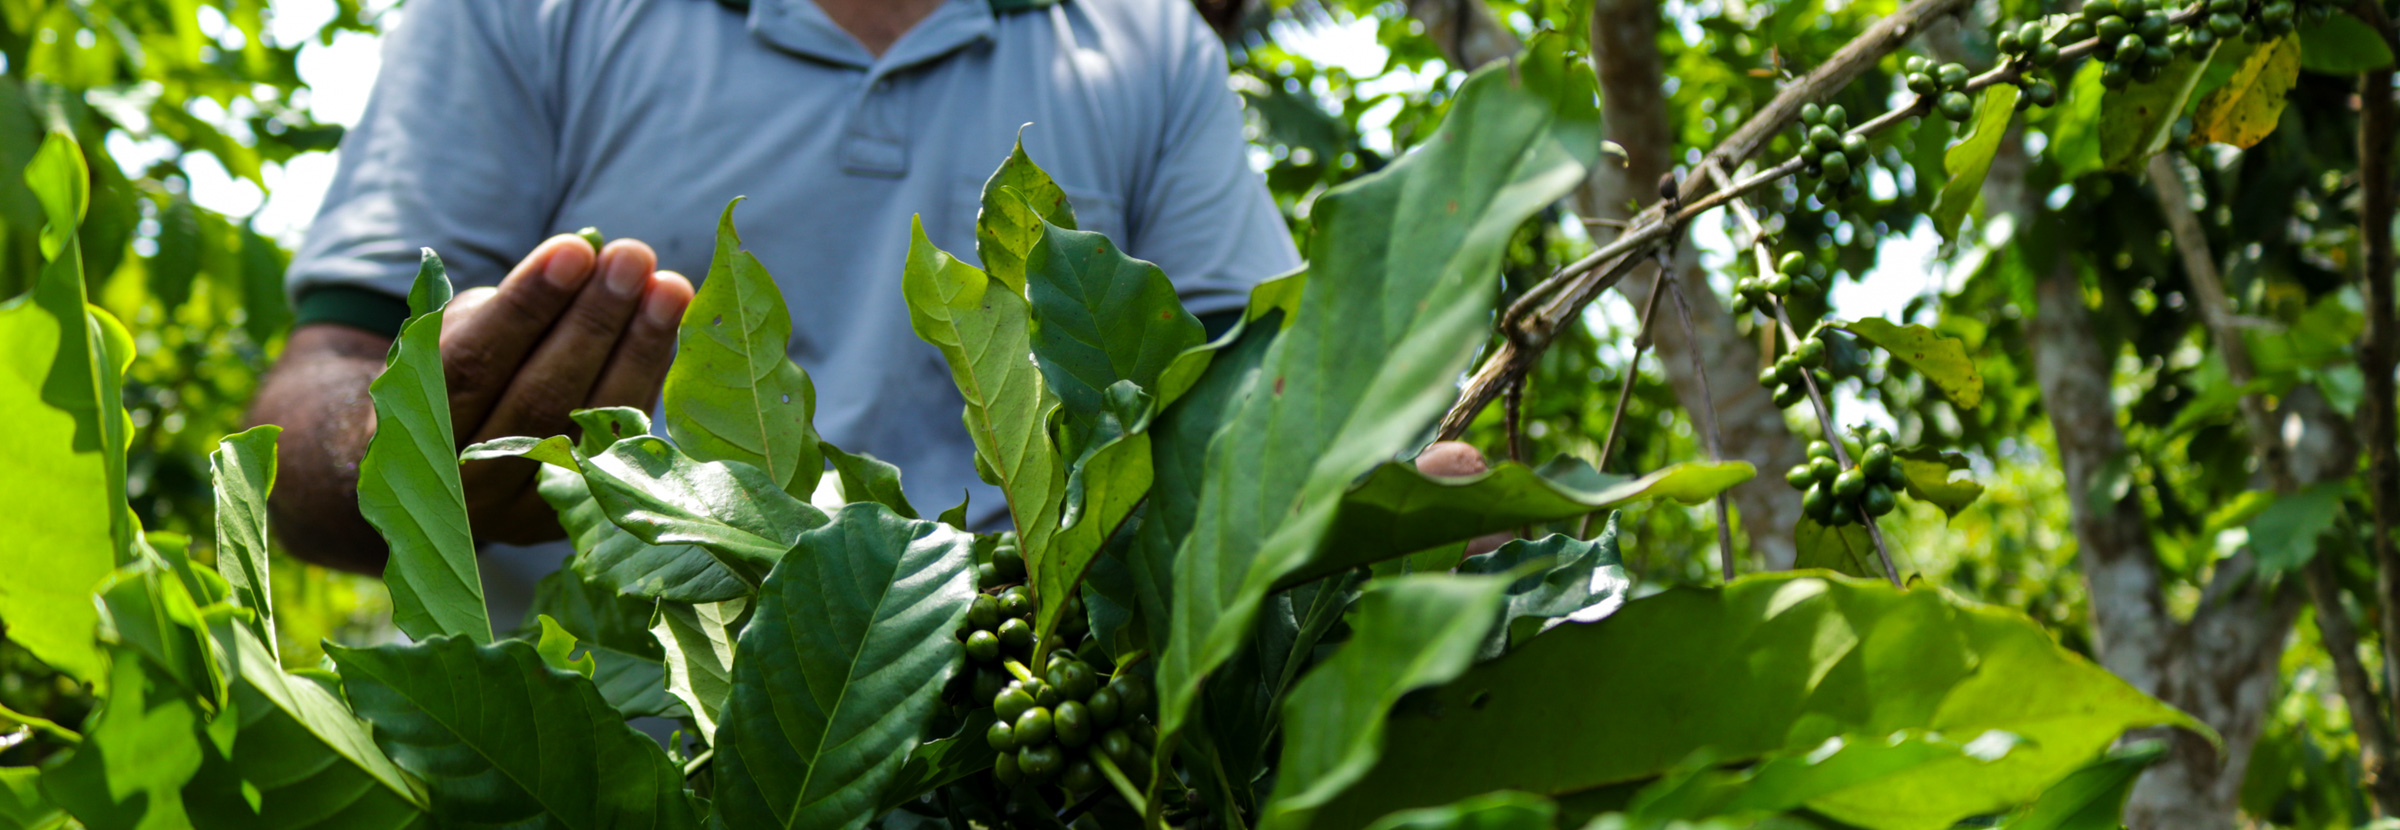 An Amazonian coffee farmer demonstrates that coffee production in the Amazon can be sustainable.